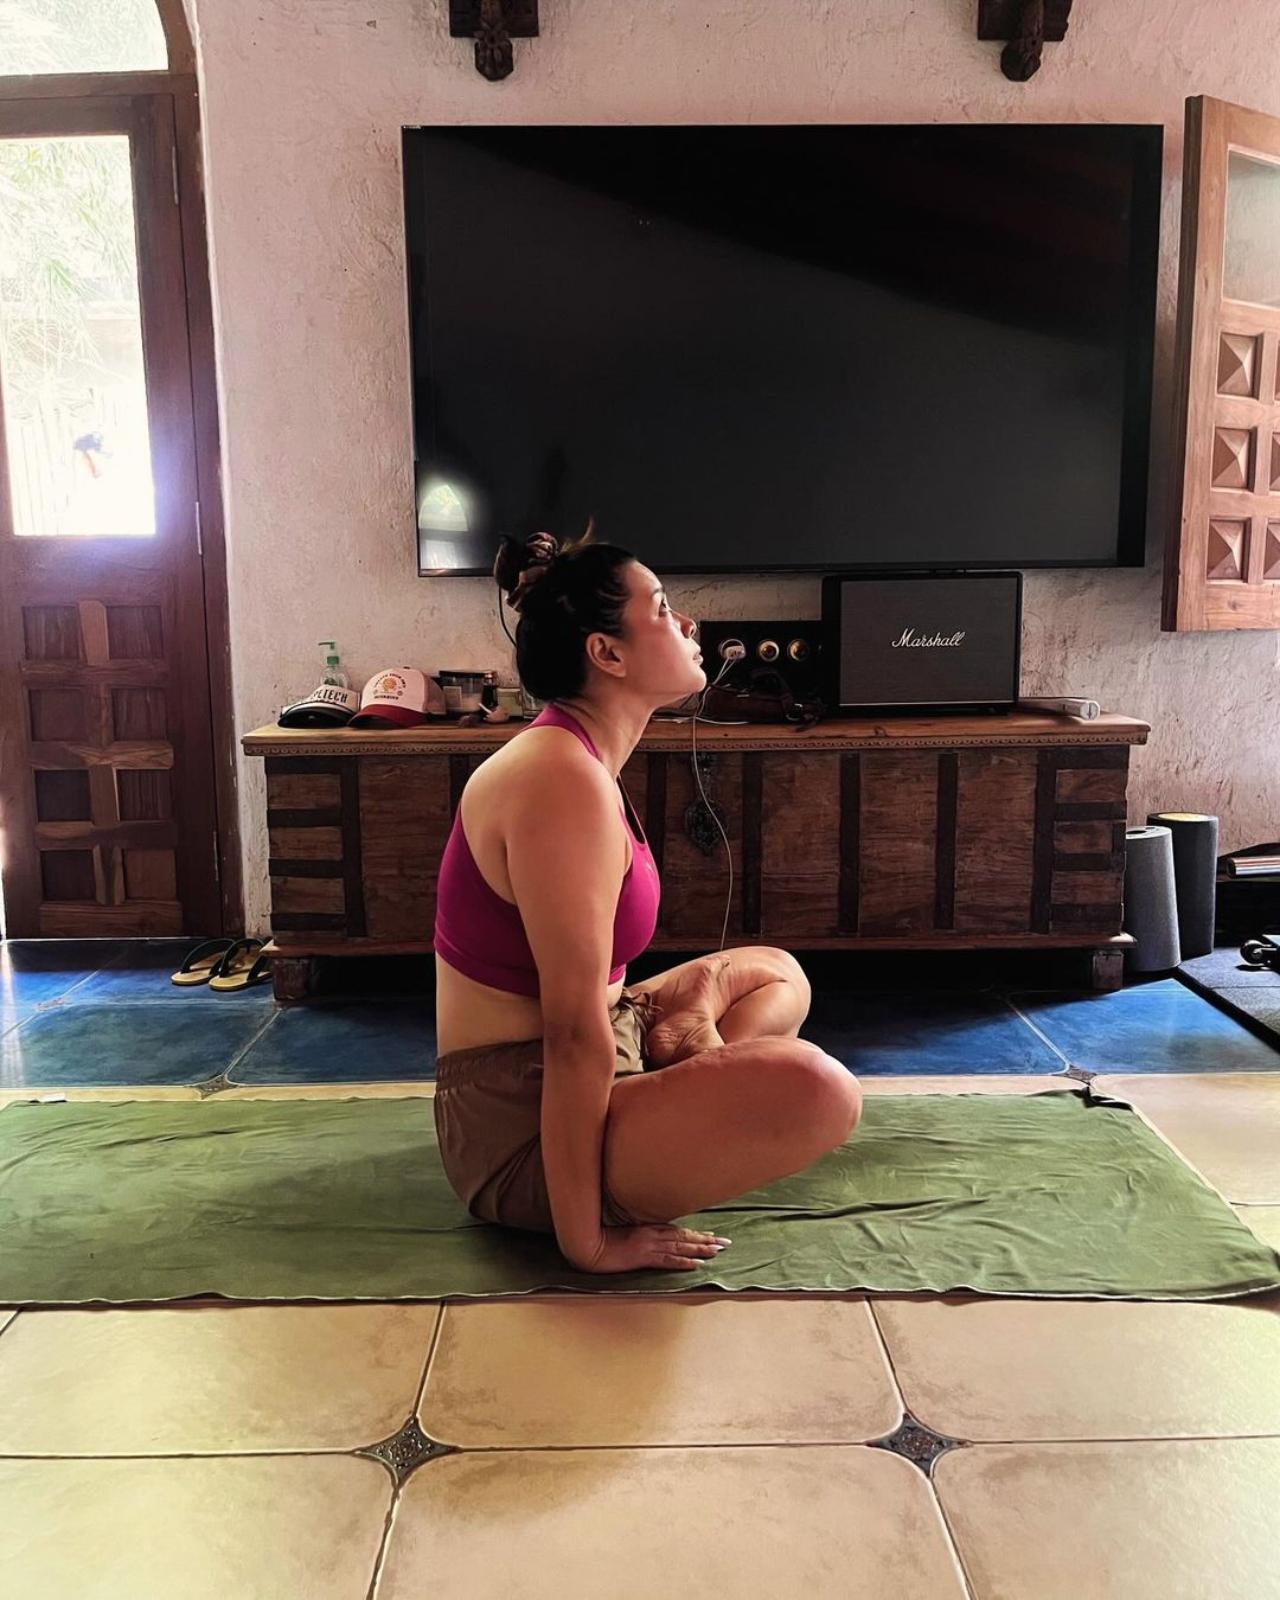 Lin Laishram took to social media to post a picture of herself doing an asana on International Yoga Day